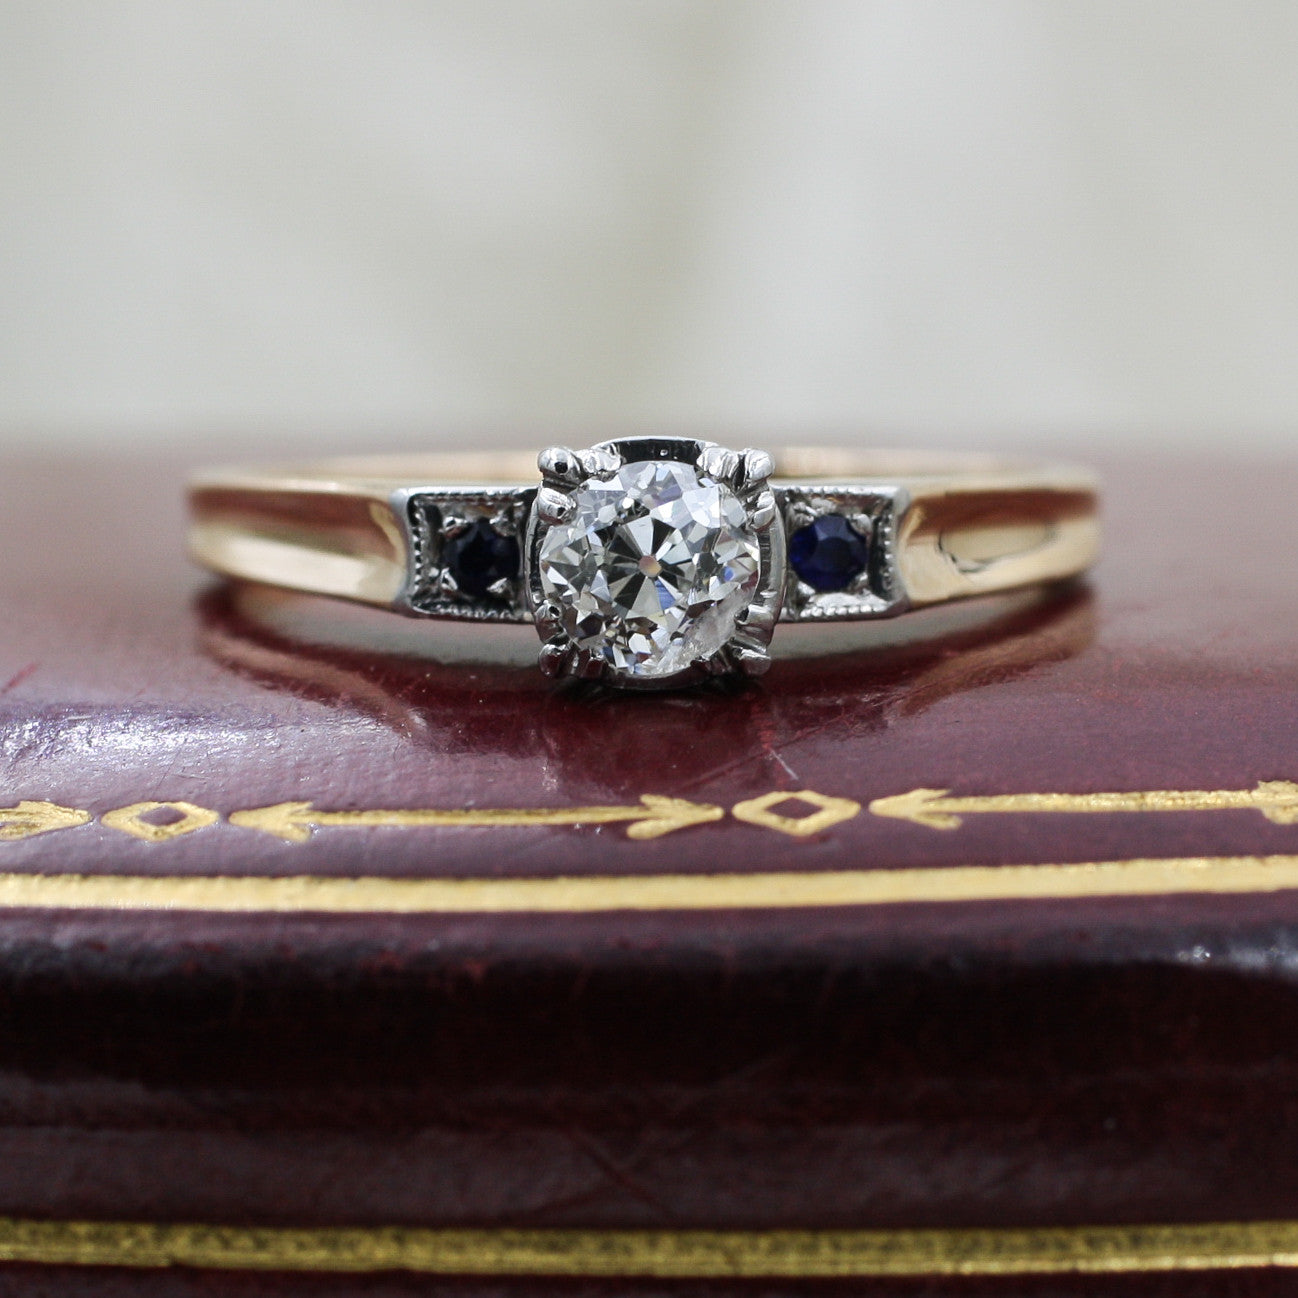 c1930 Transitional Cut Diamond and Sapphire Ring